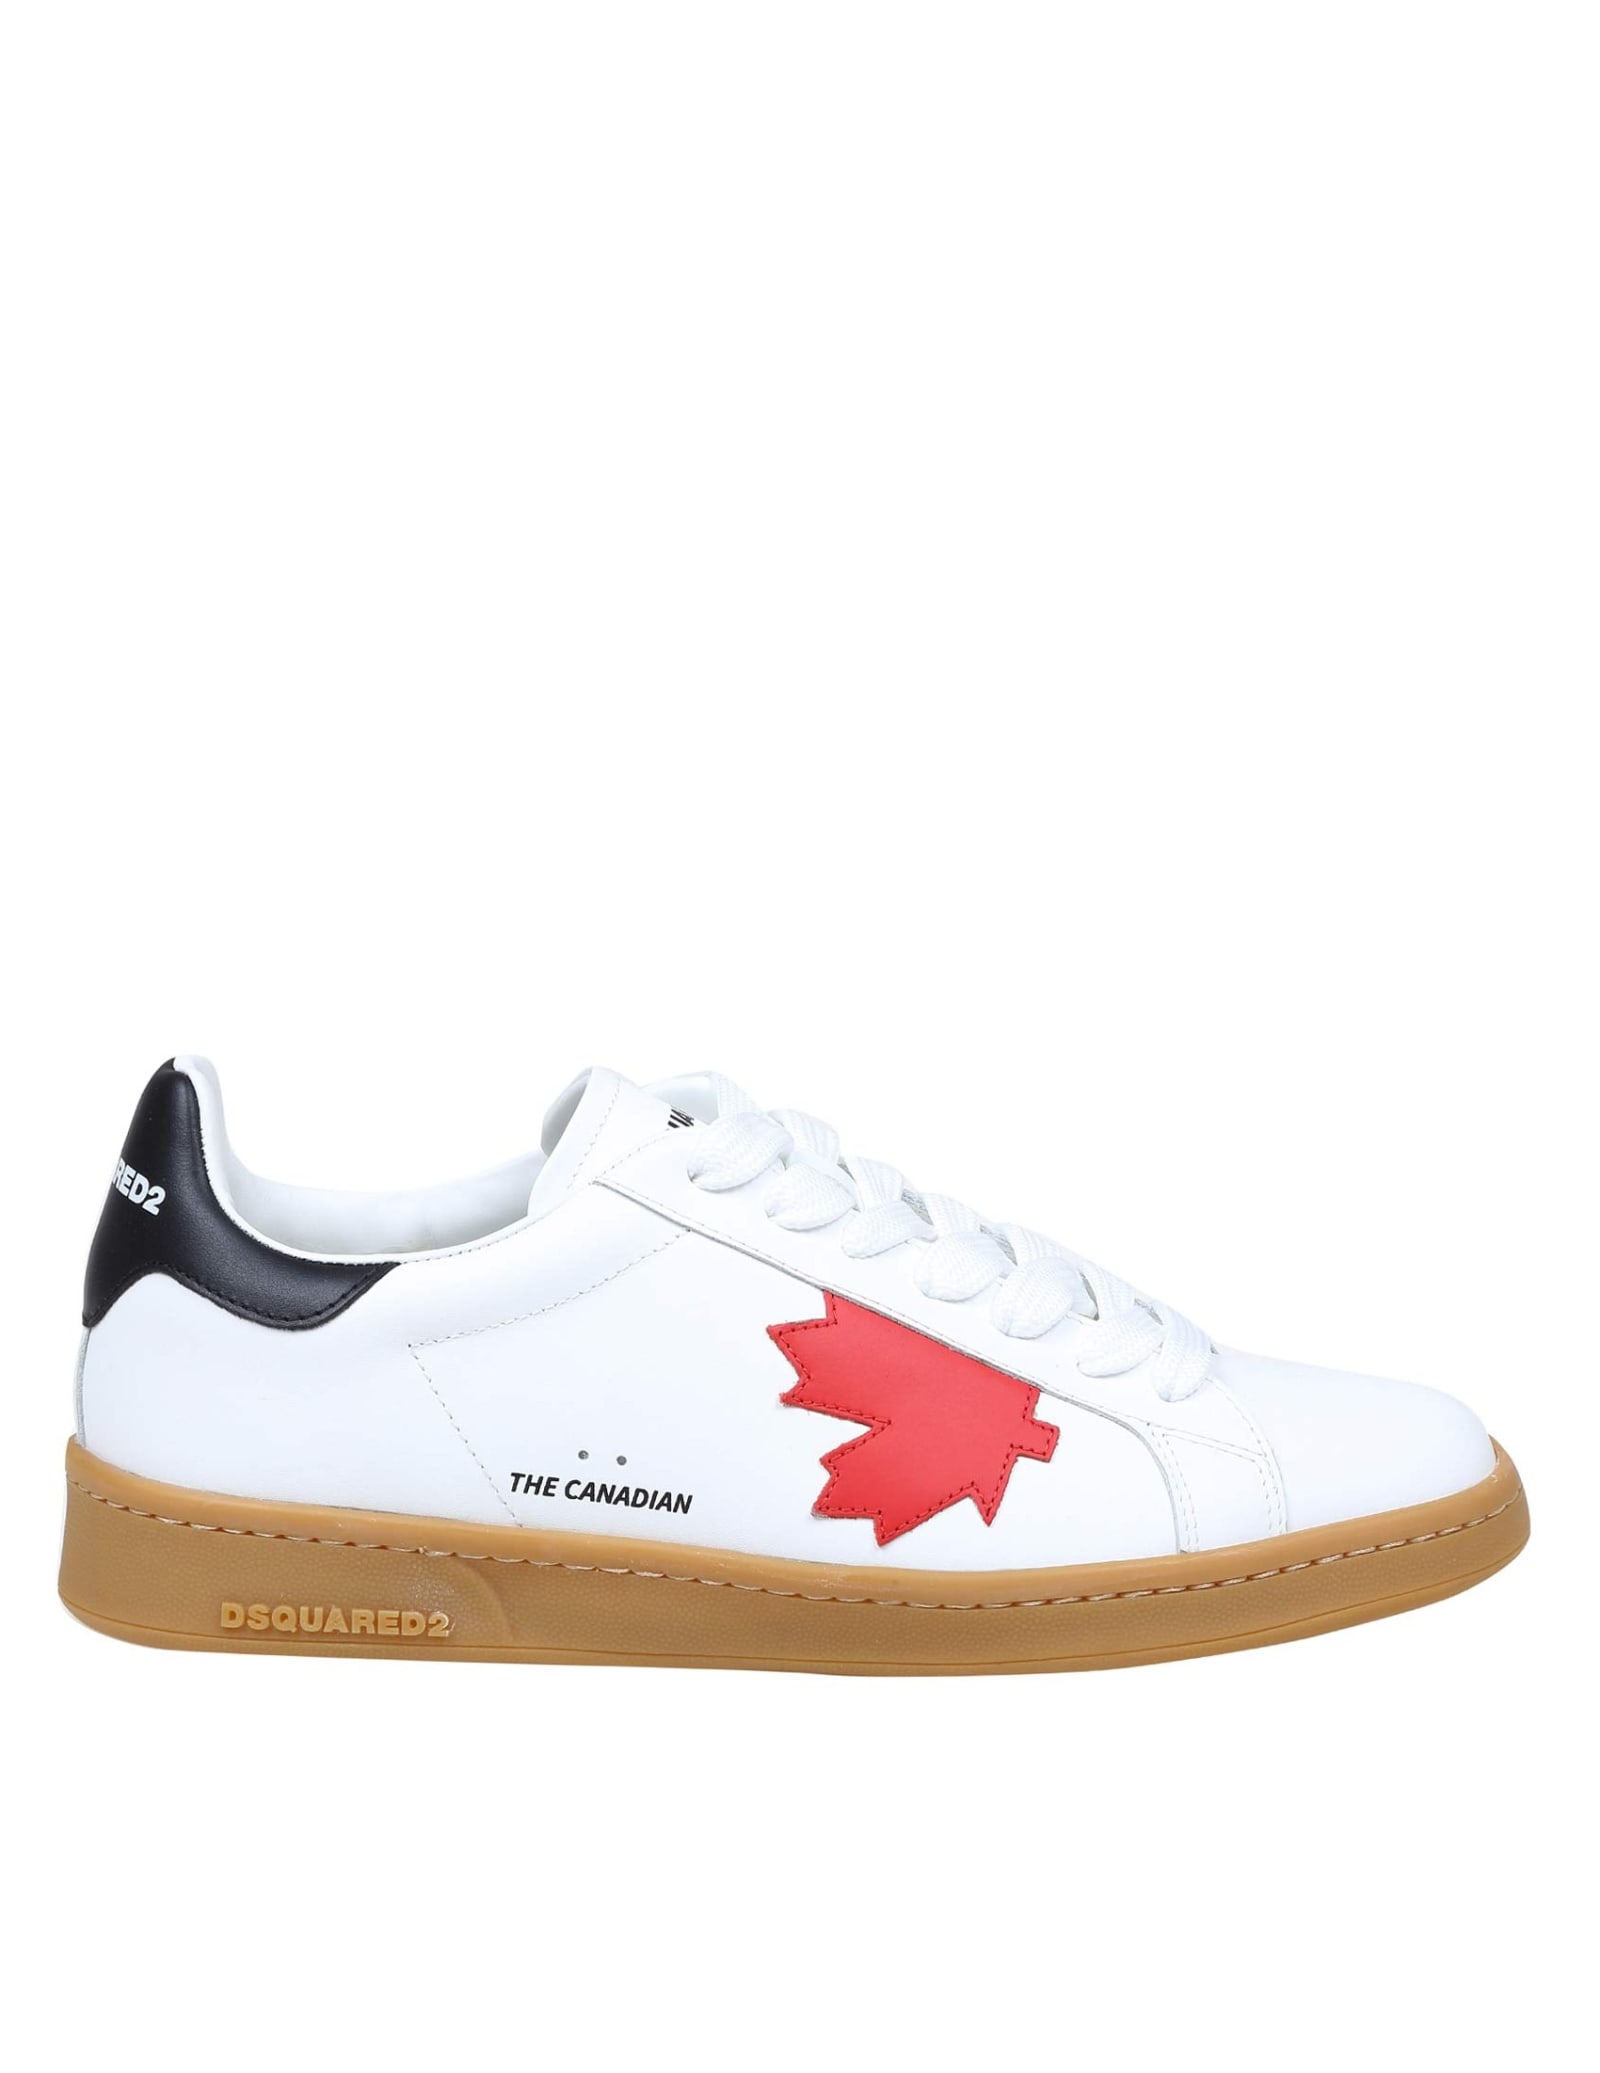 Dsquared2 Boxer Sneakers In White Calf Leather